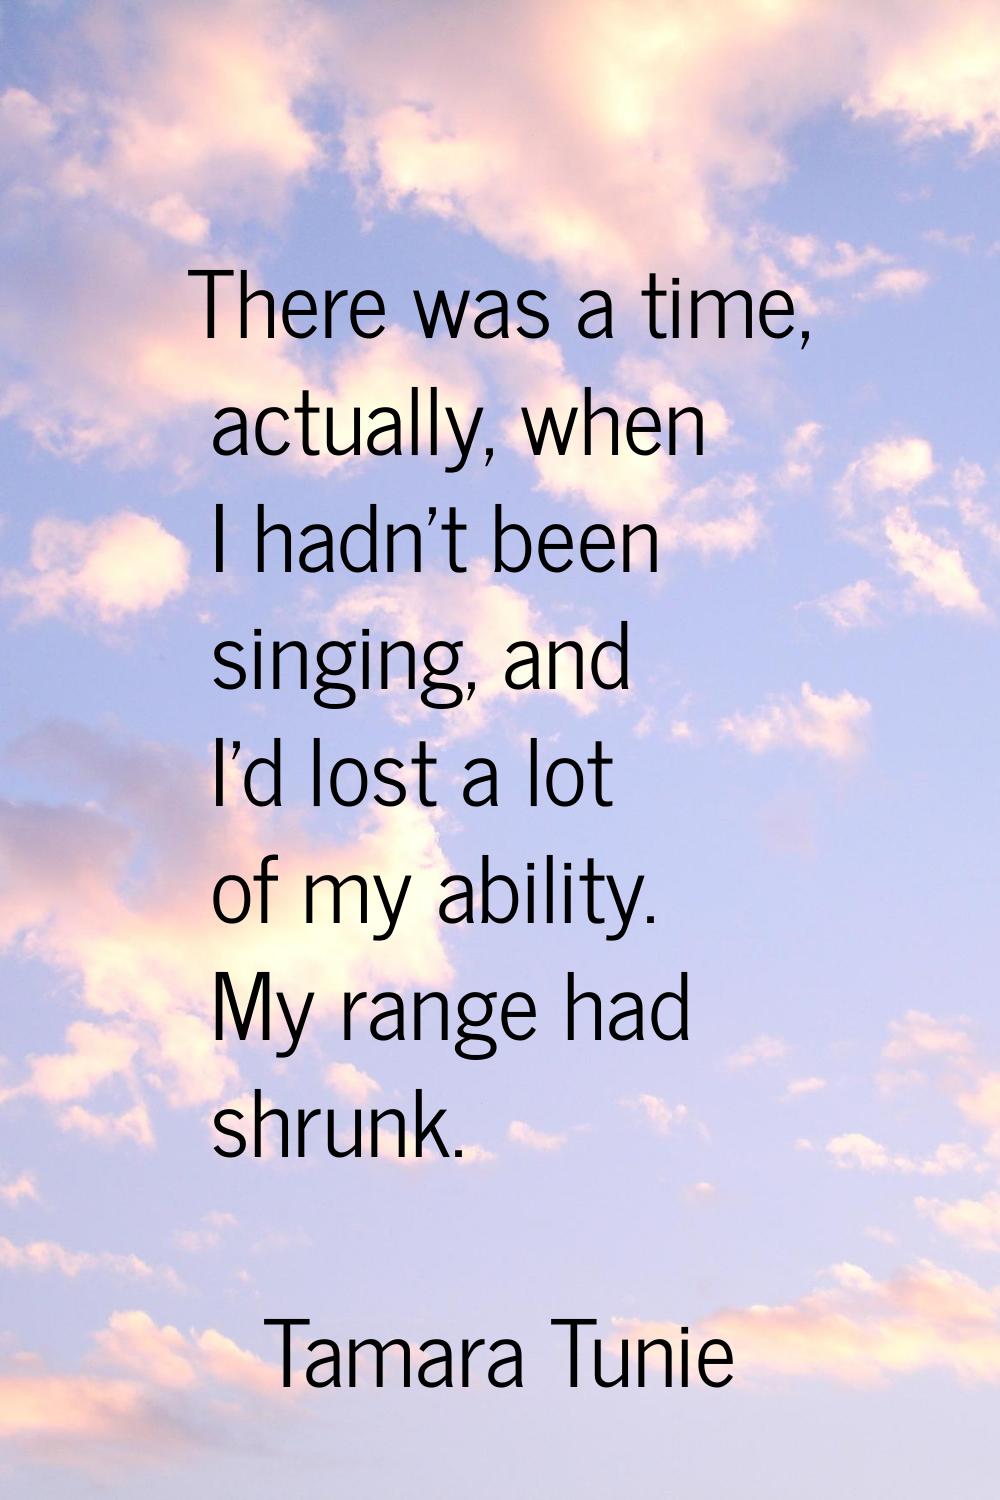 There was a time, actually, when I hadn't been singing, and I'd lost a lot of my ability. My range 